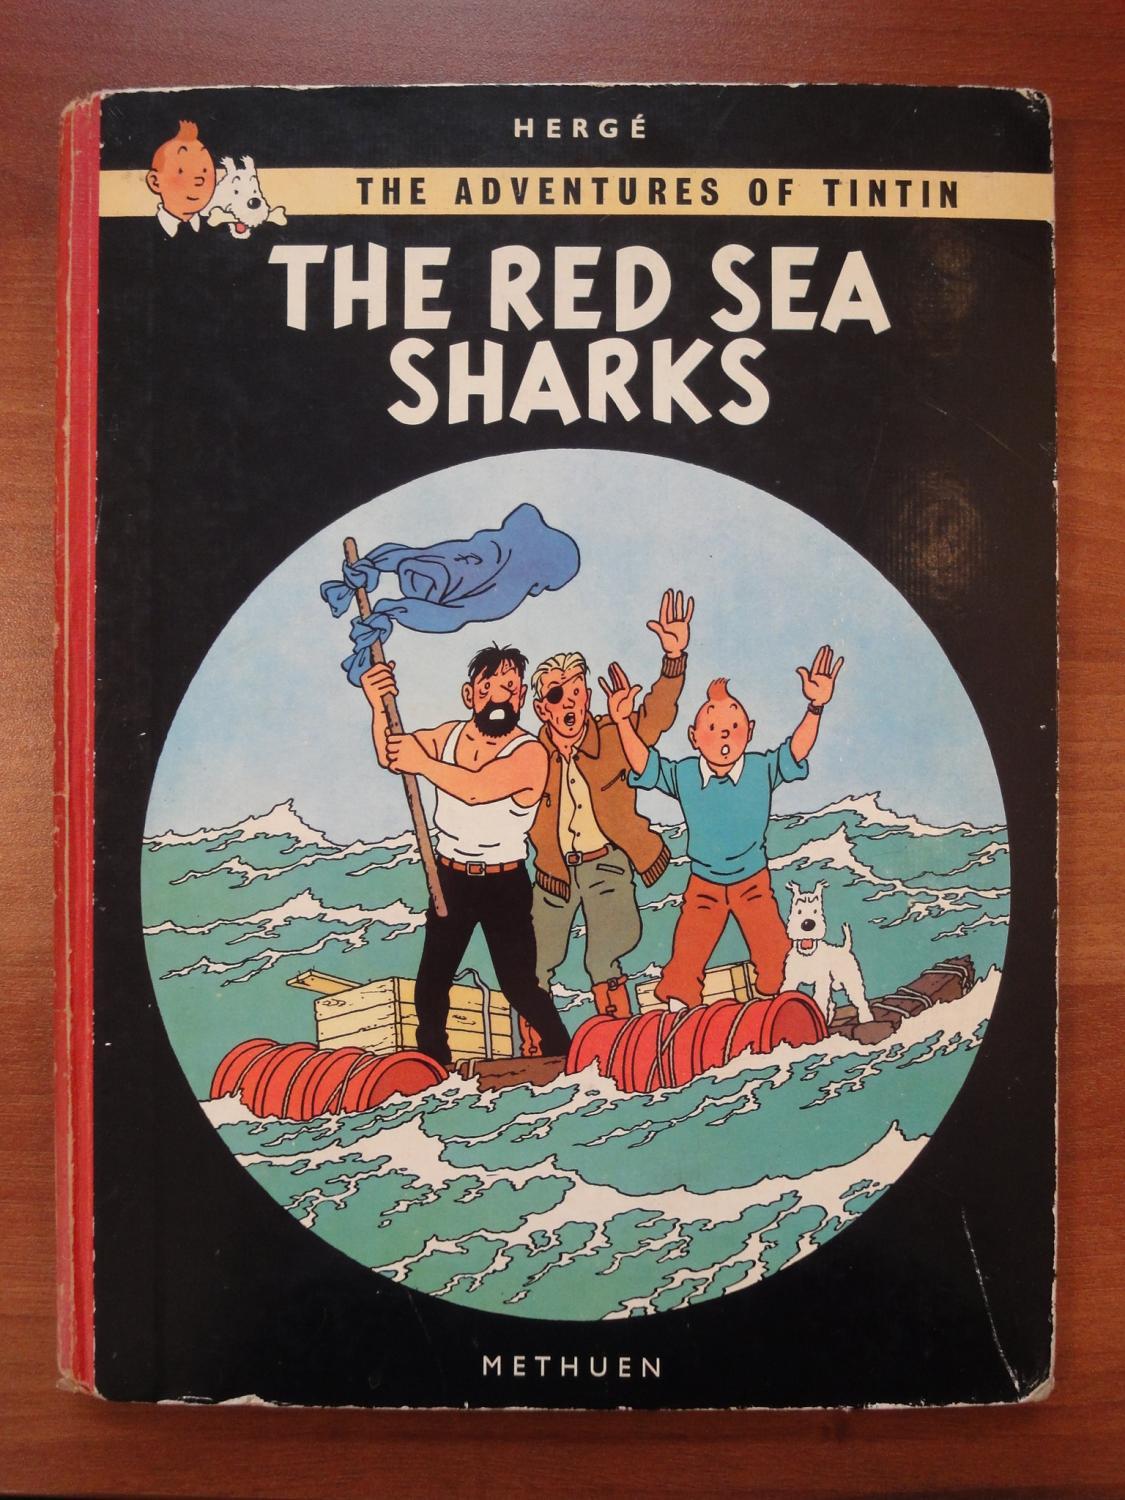 The Adventures of Tintin: The Red Sea Sharks - 1st Edition Methuen by Herge: Good Hardcover (1960) 1st Edition. | CKR Inc.